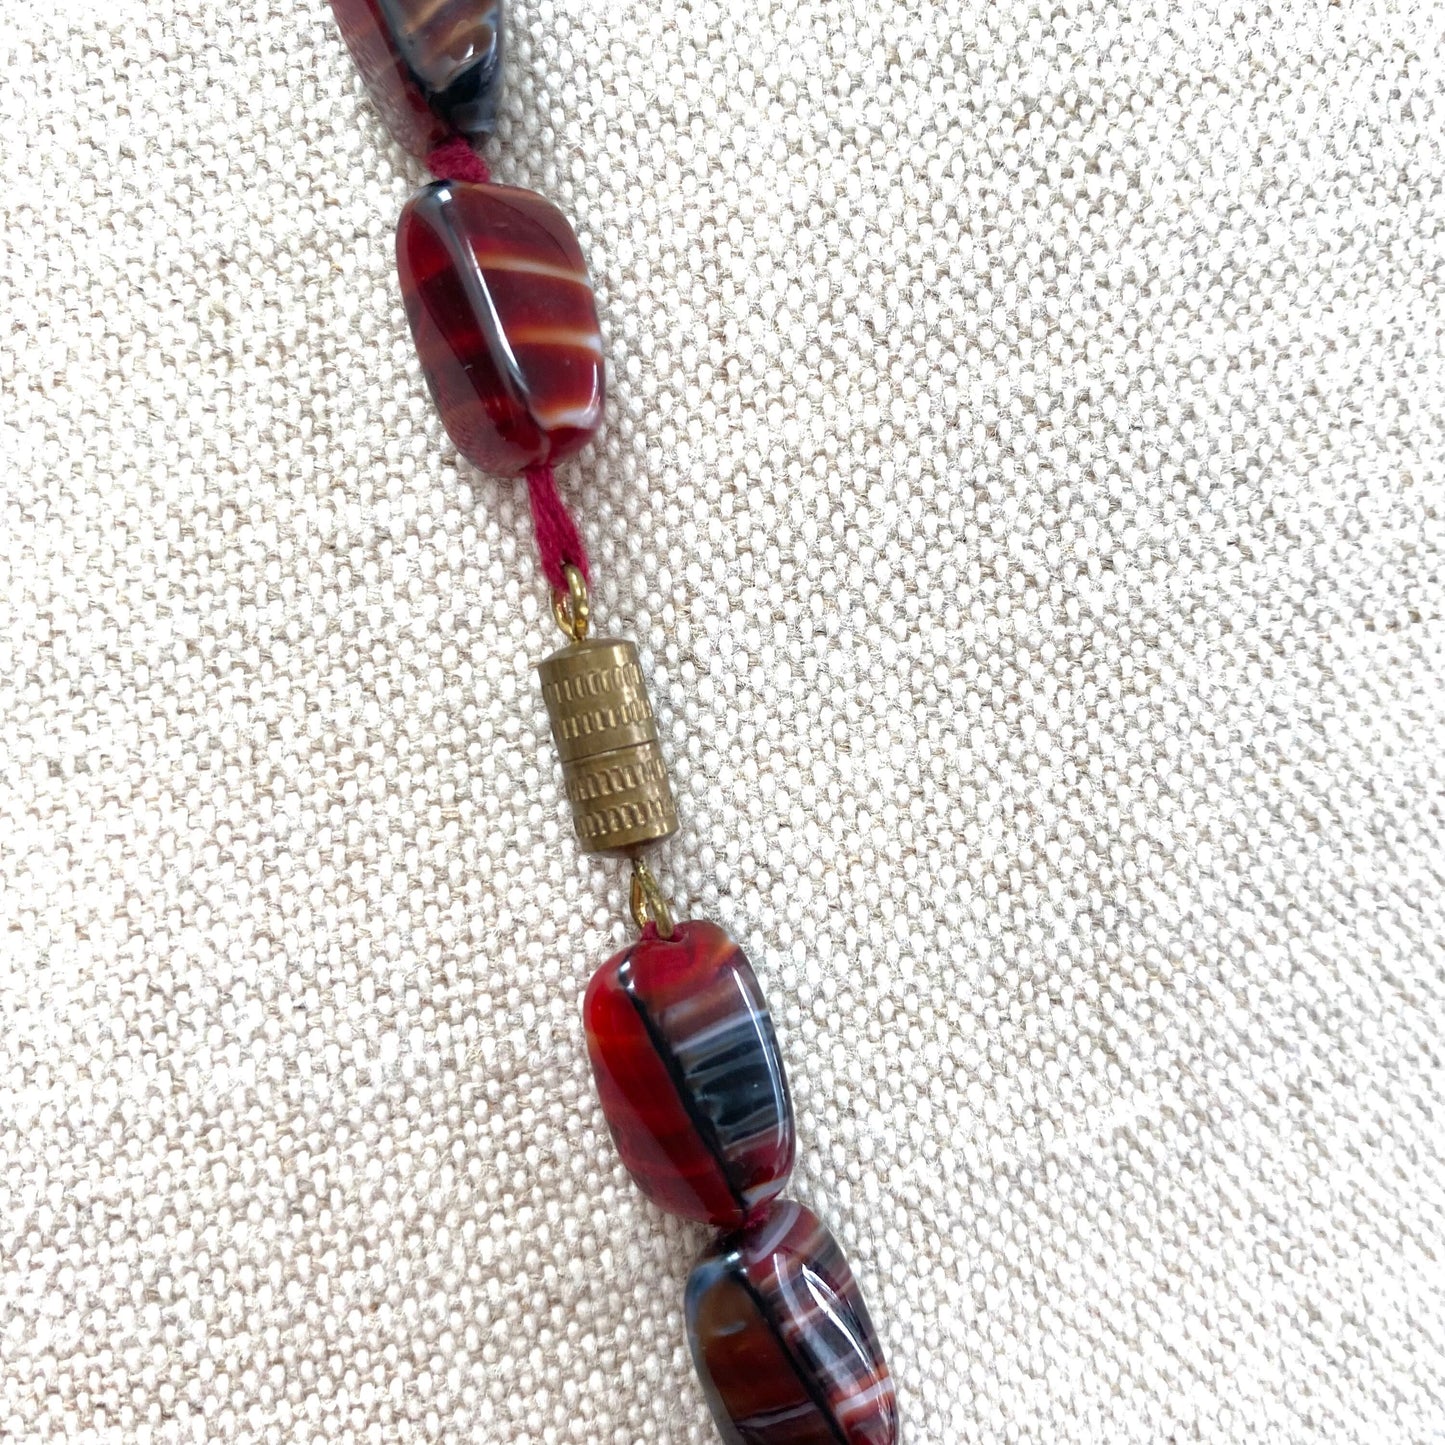 Red, Black and White Hand Knotted Graduated Glass Bead Necklace